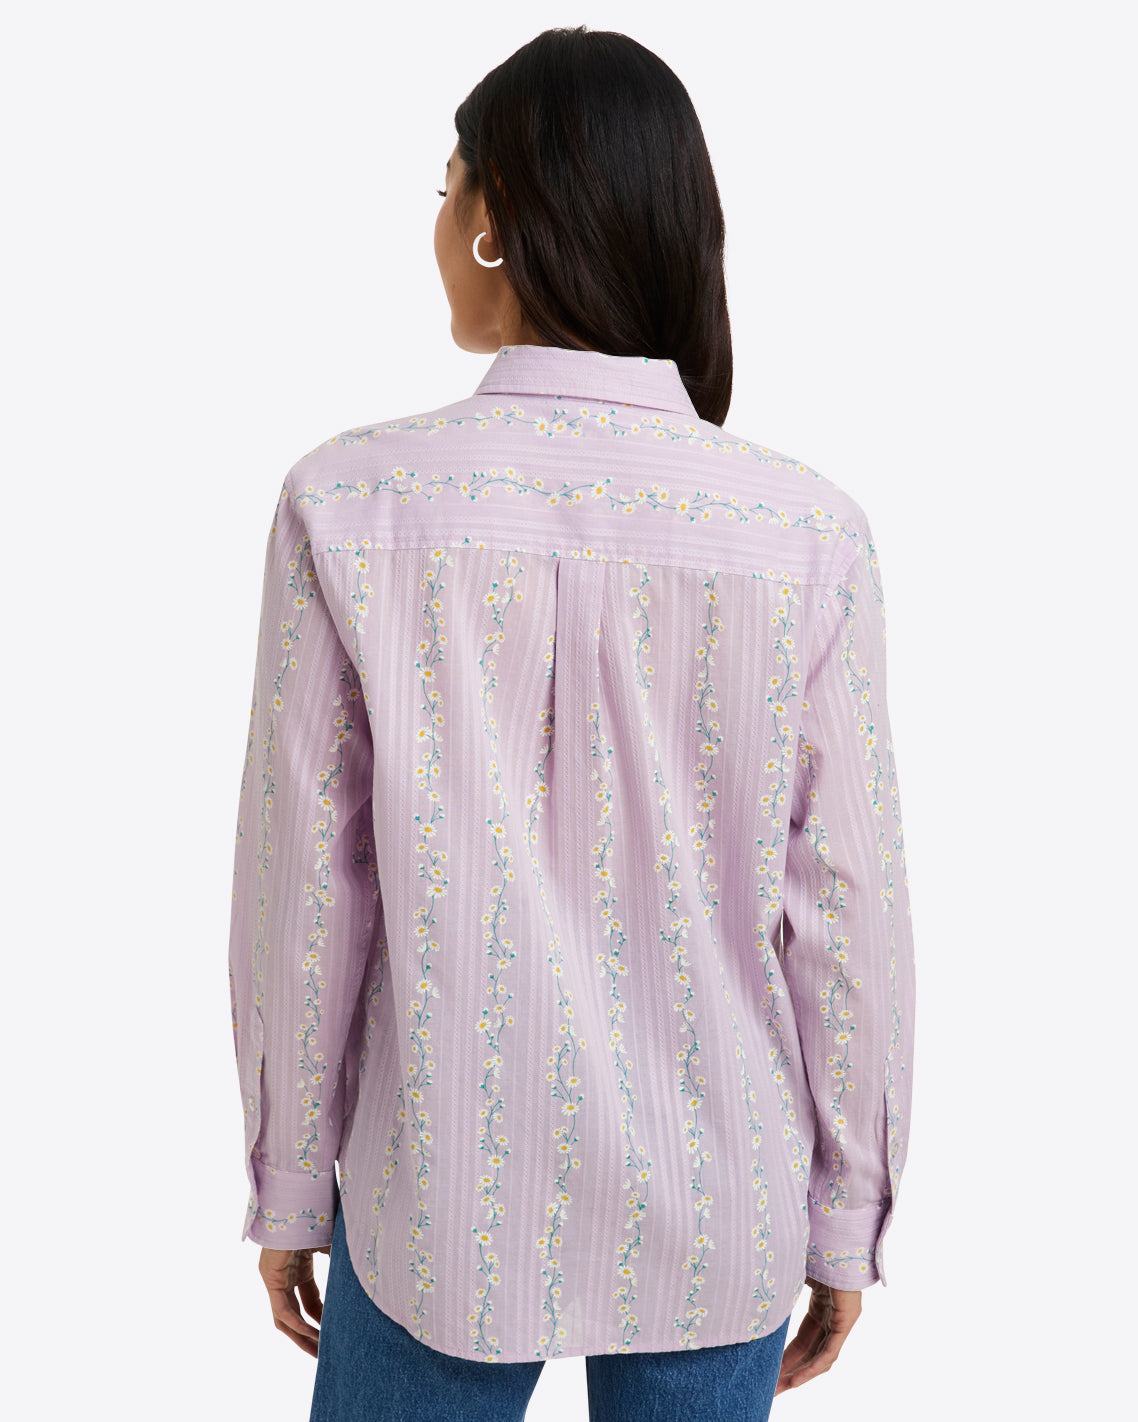 Lynn Long Sleeve Top in Embroidered Cotton Dobby